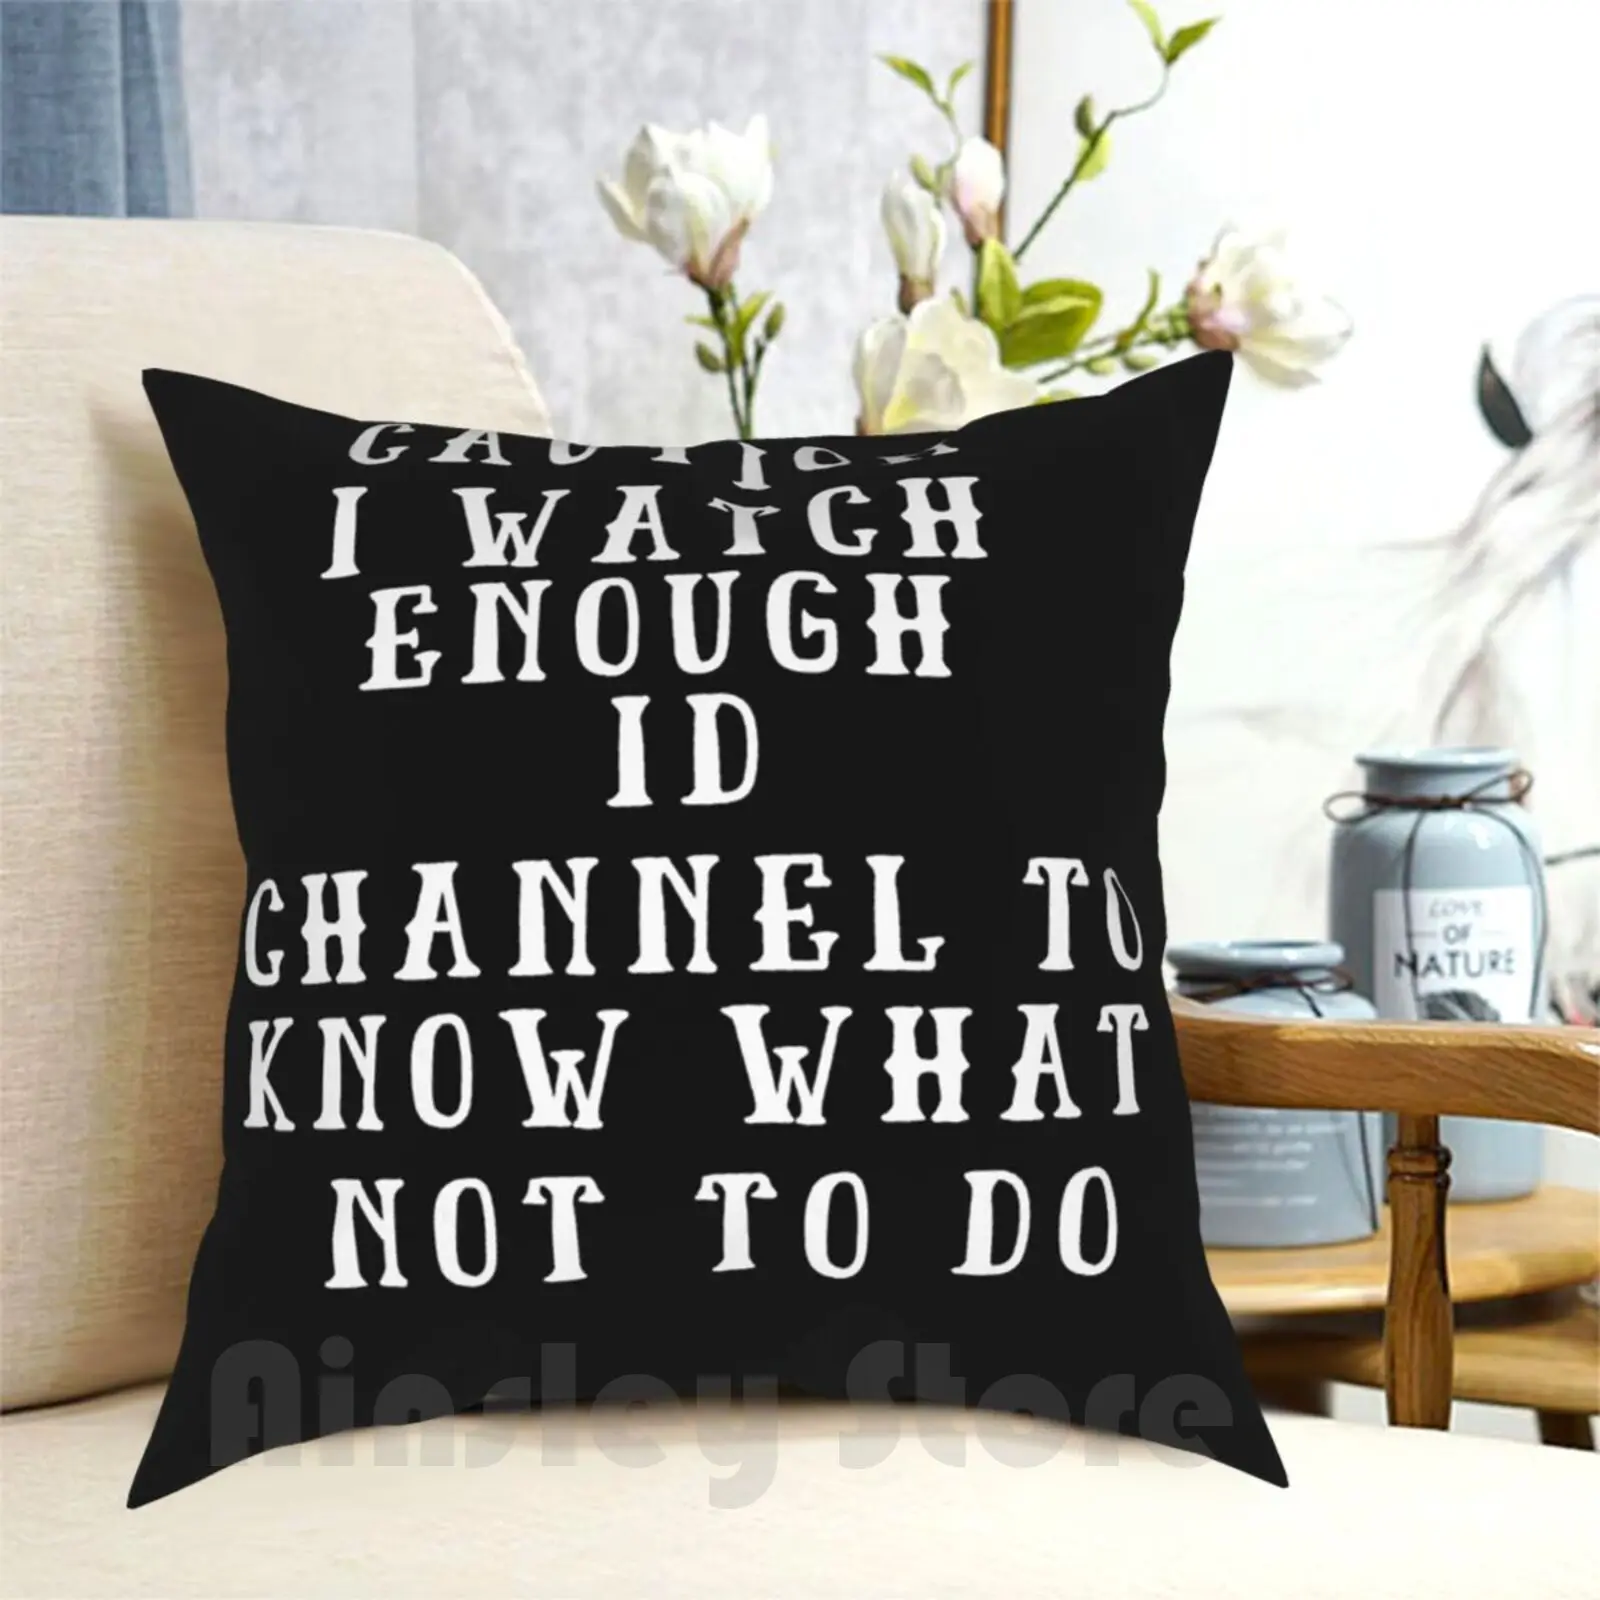 Caution I Watch Enough Id Channel To Know What Not To Do Pillow Case Printed Home Soft Throw Pillow Id Channel Fun